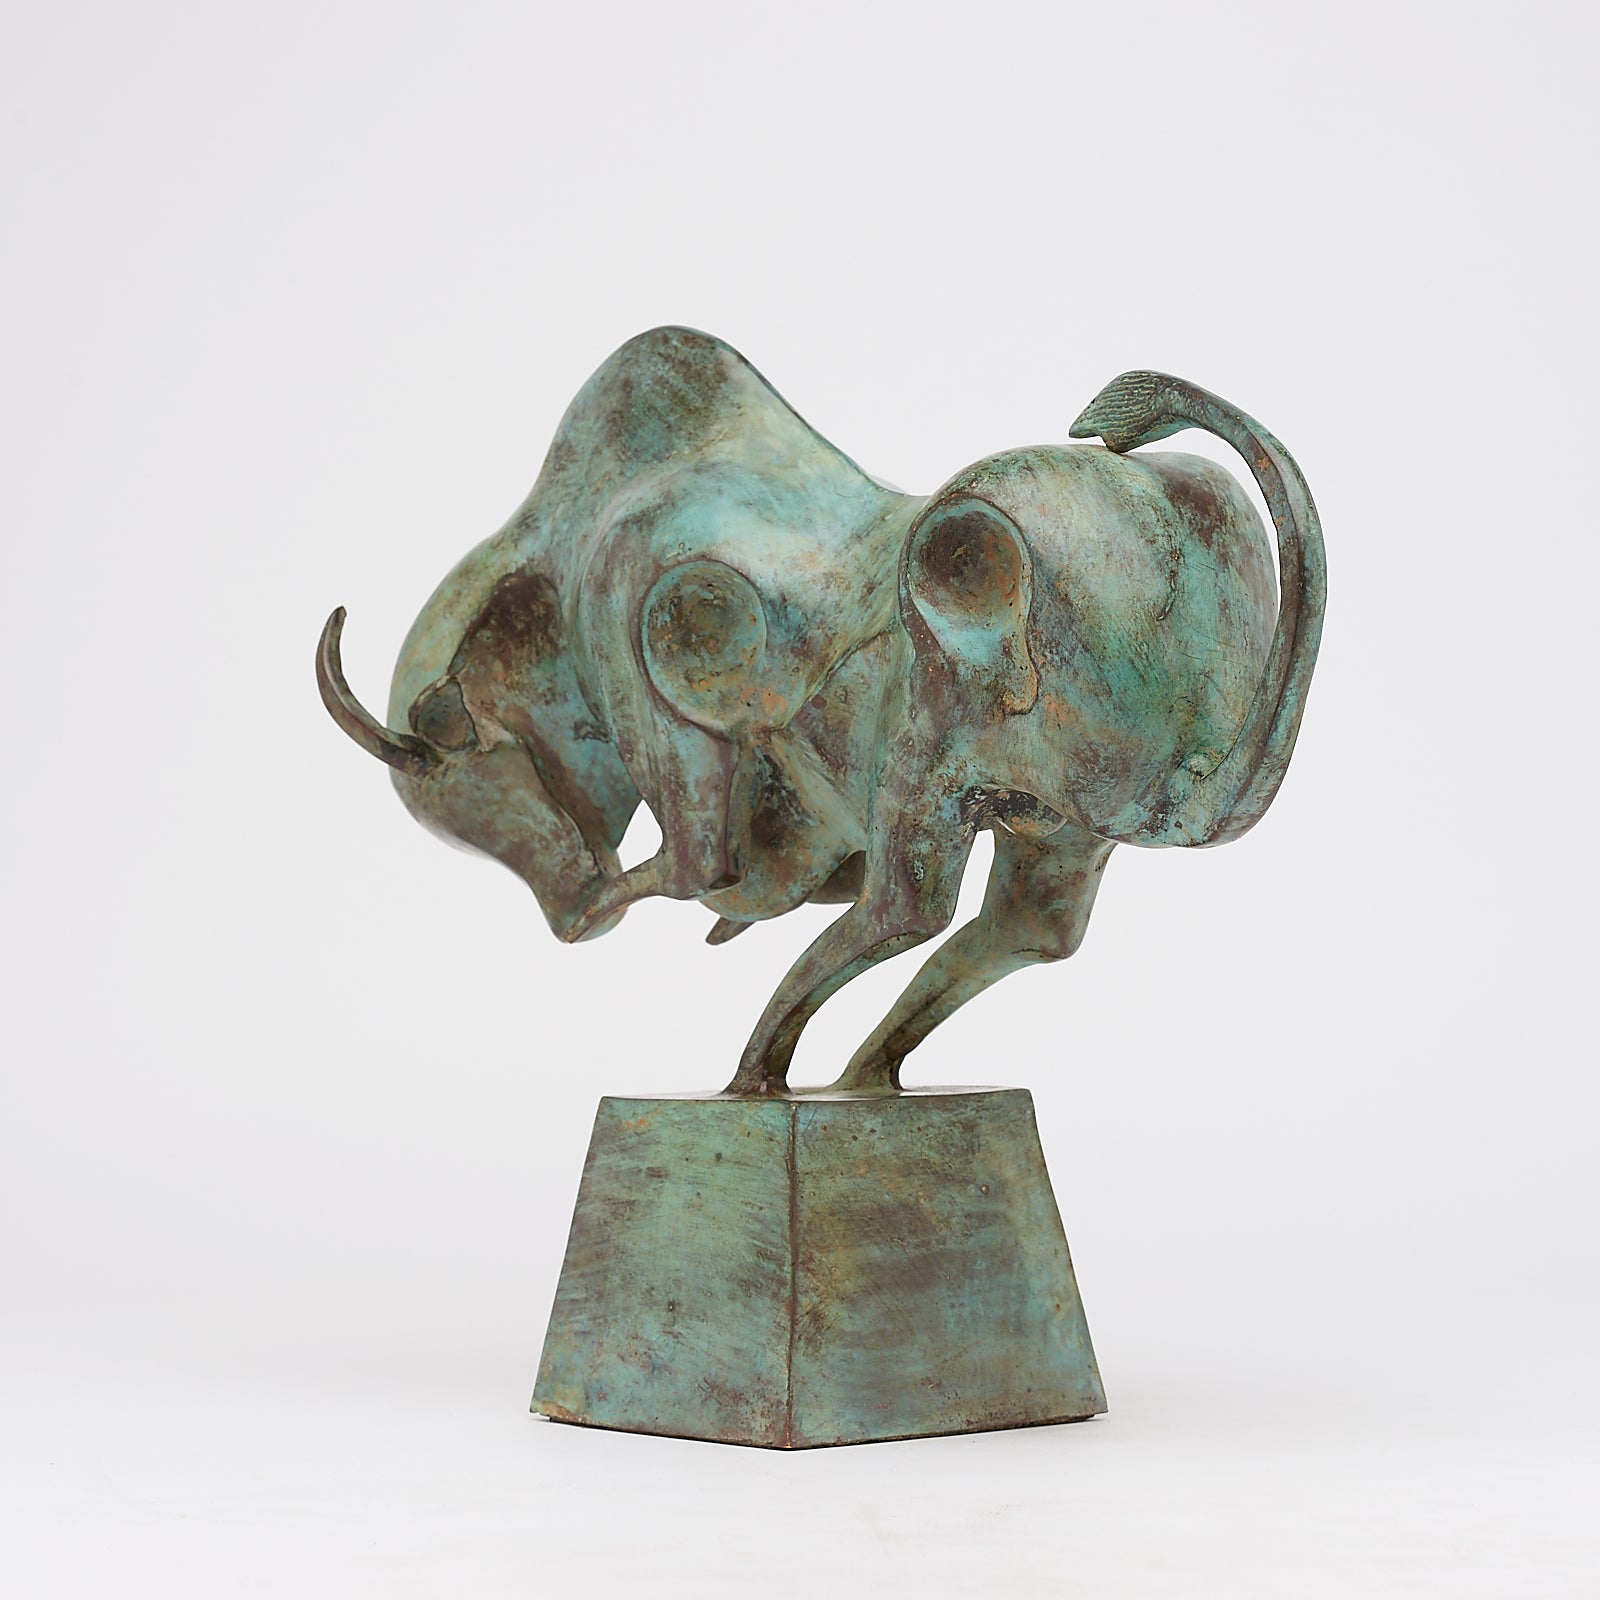 Patinated Cubist Bull